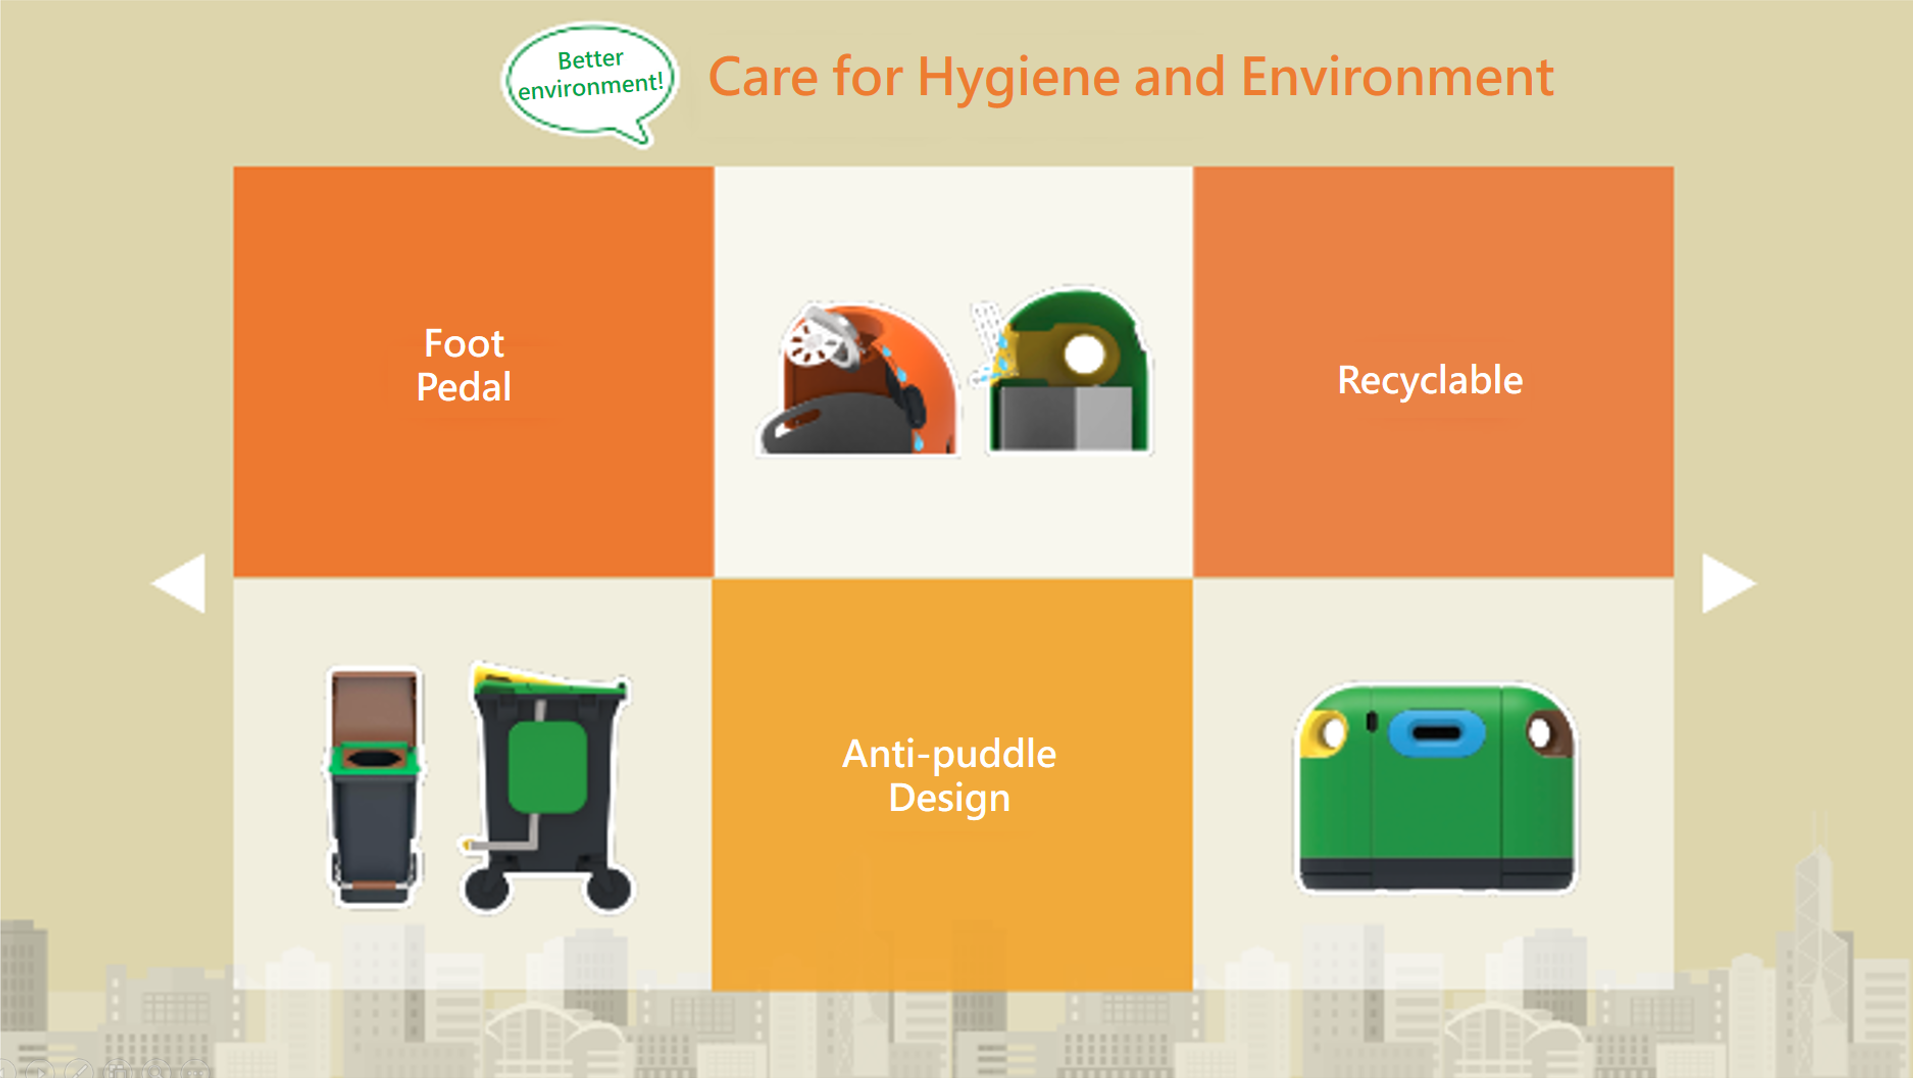 Care for Hygiene and Environment